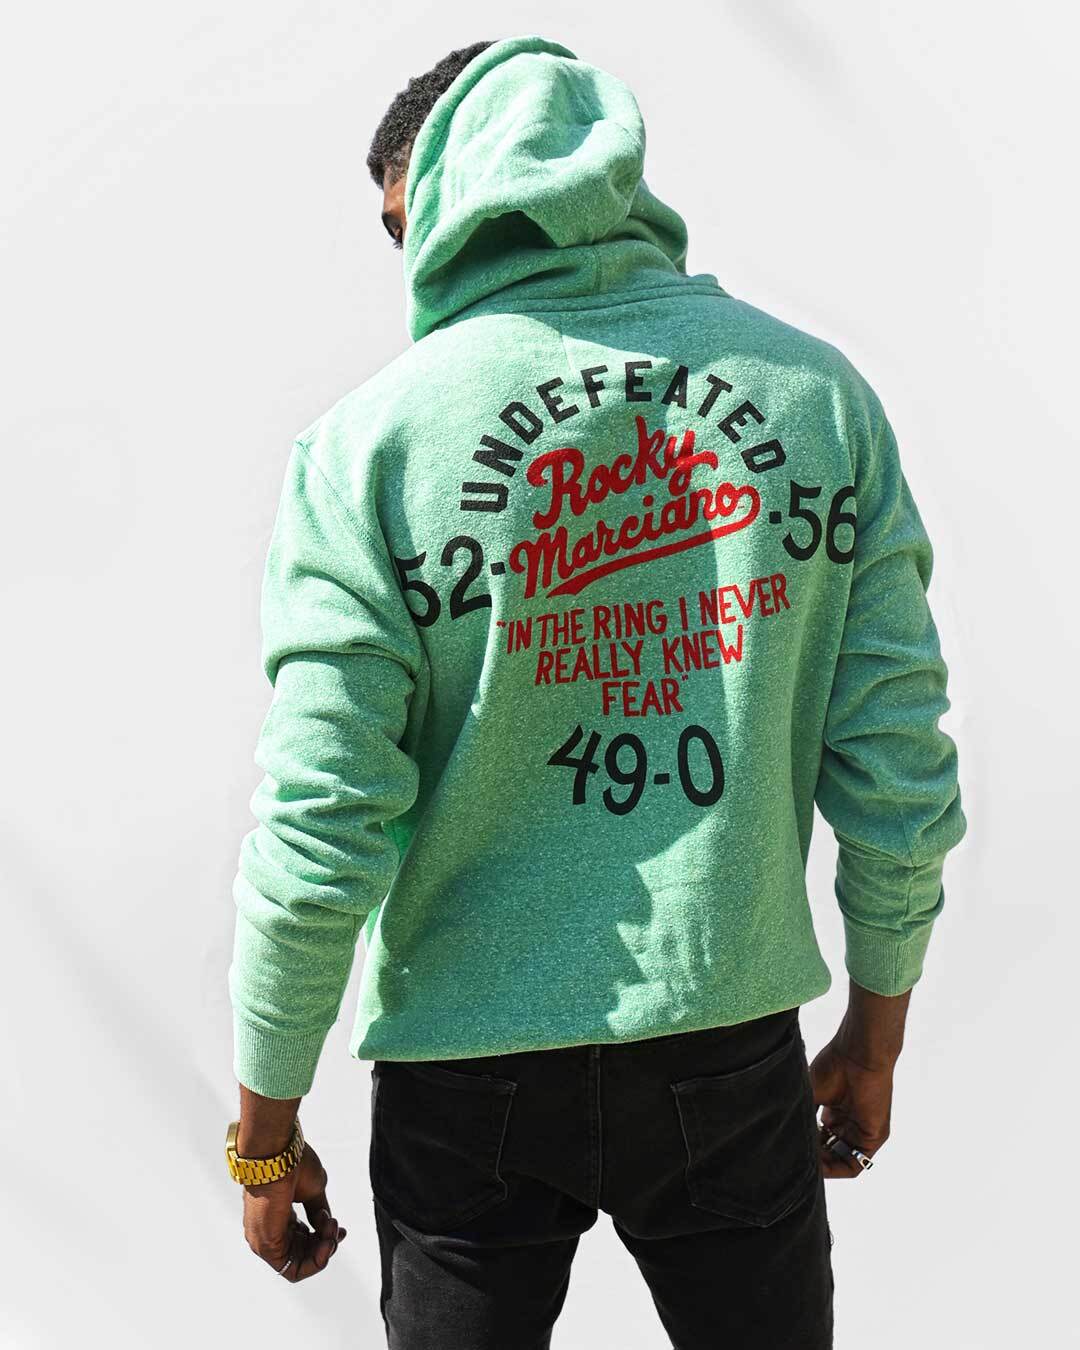 Rocky Marciano Undefeated Heather Green PO Hoody - Roots of Fight Canada